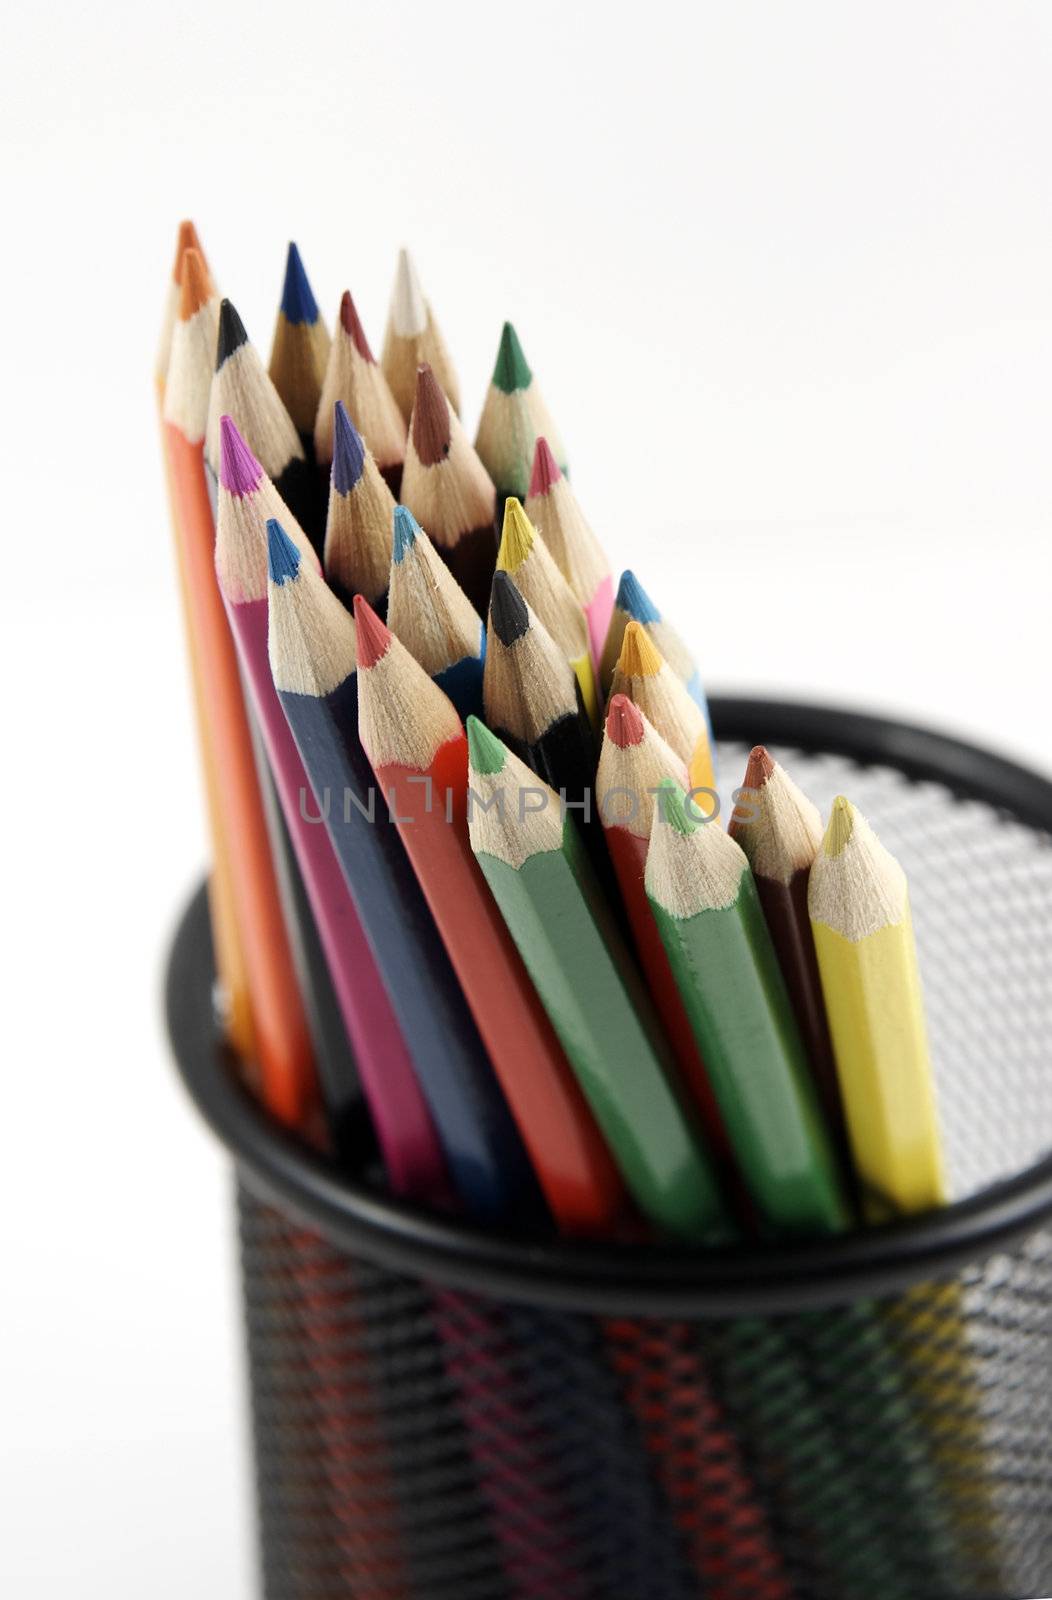 Bunch of colored pencils on white background. Selective focus